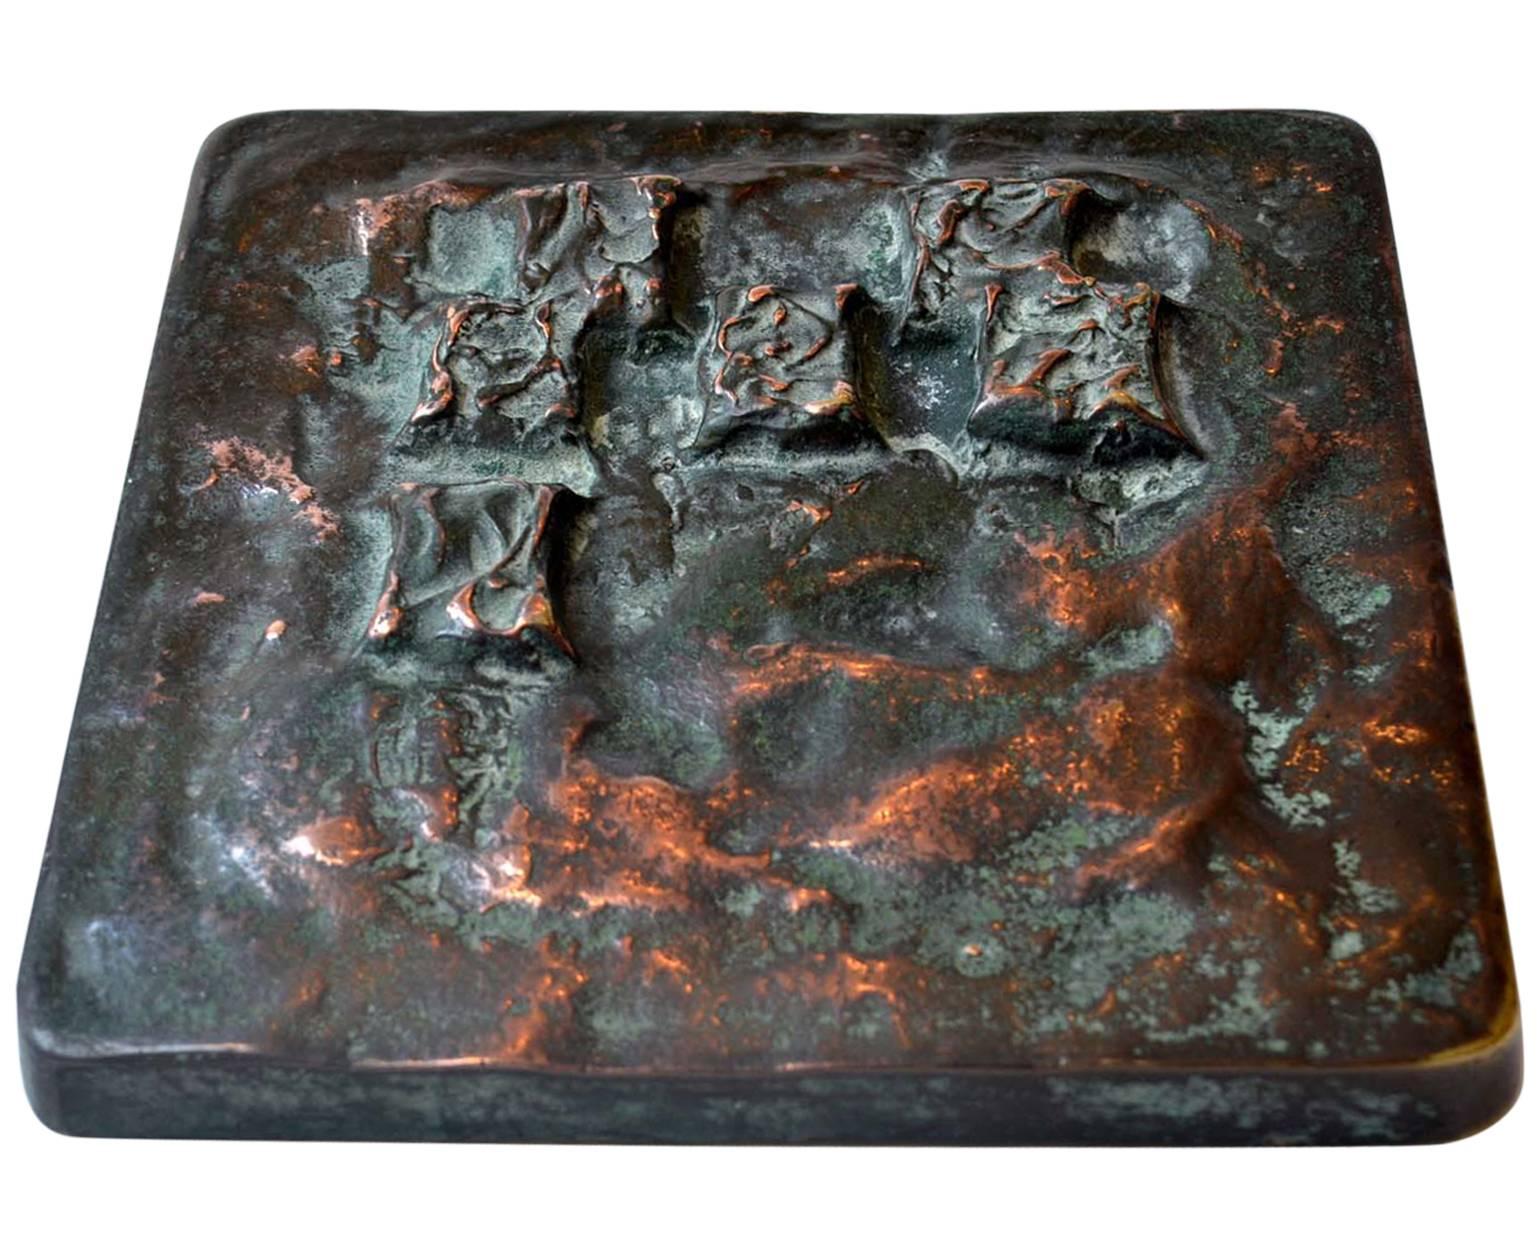 Square bronze cast door handle with a textural relief, and dark patina, suitable for doors with a push and pull mechanism.
The handle brackets are attached to the main plate by two fixings, they can be positioned in two ways, inwards outwards. The